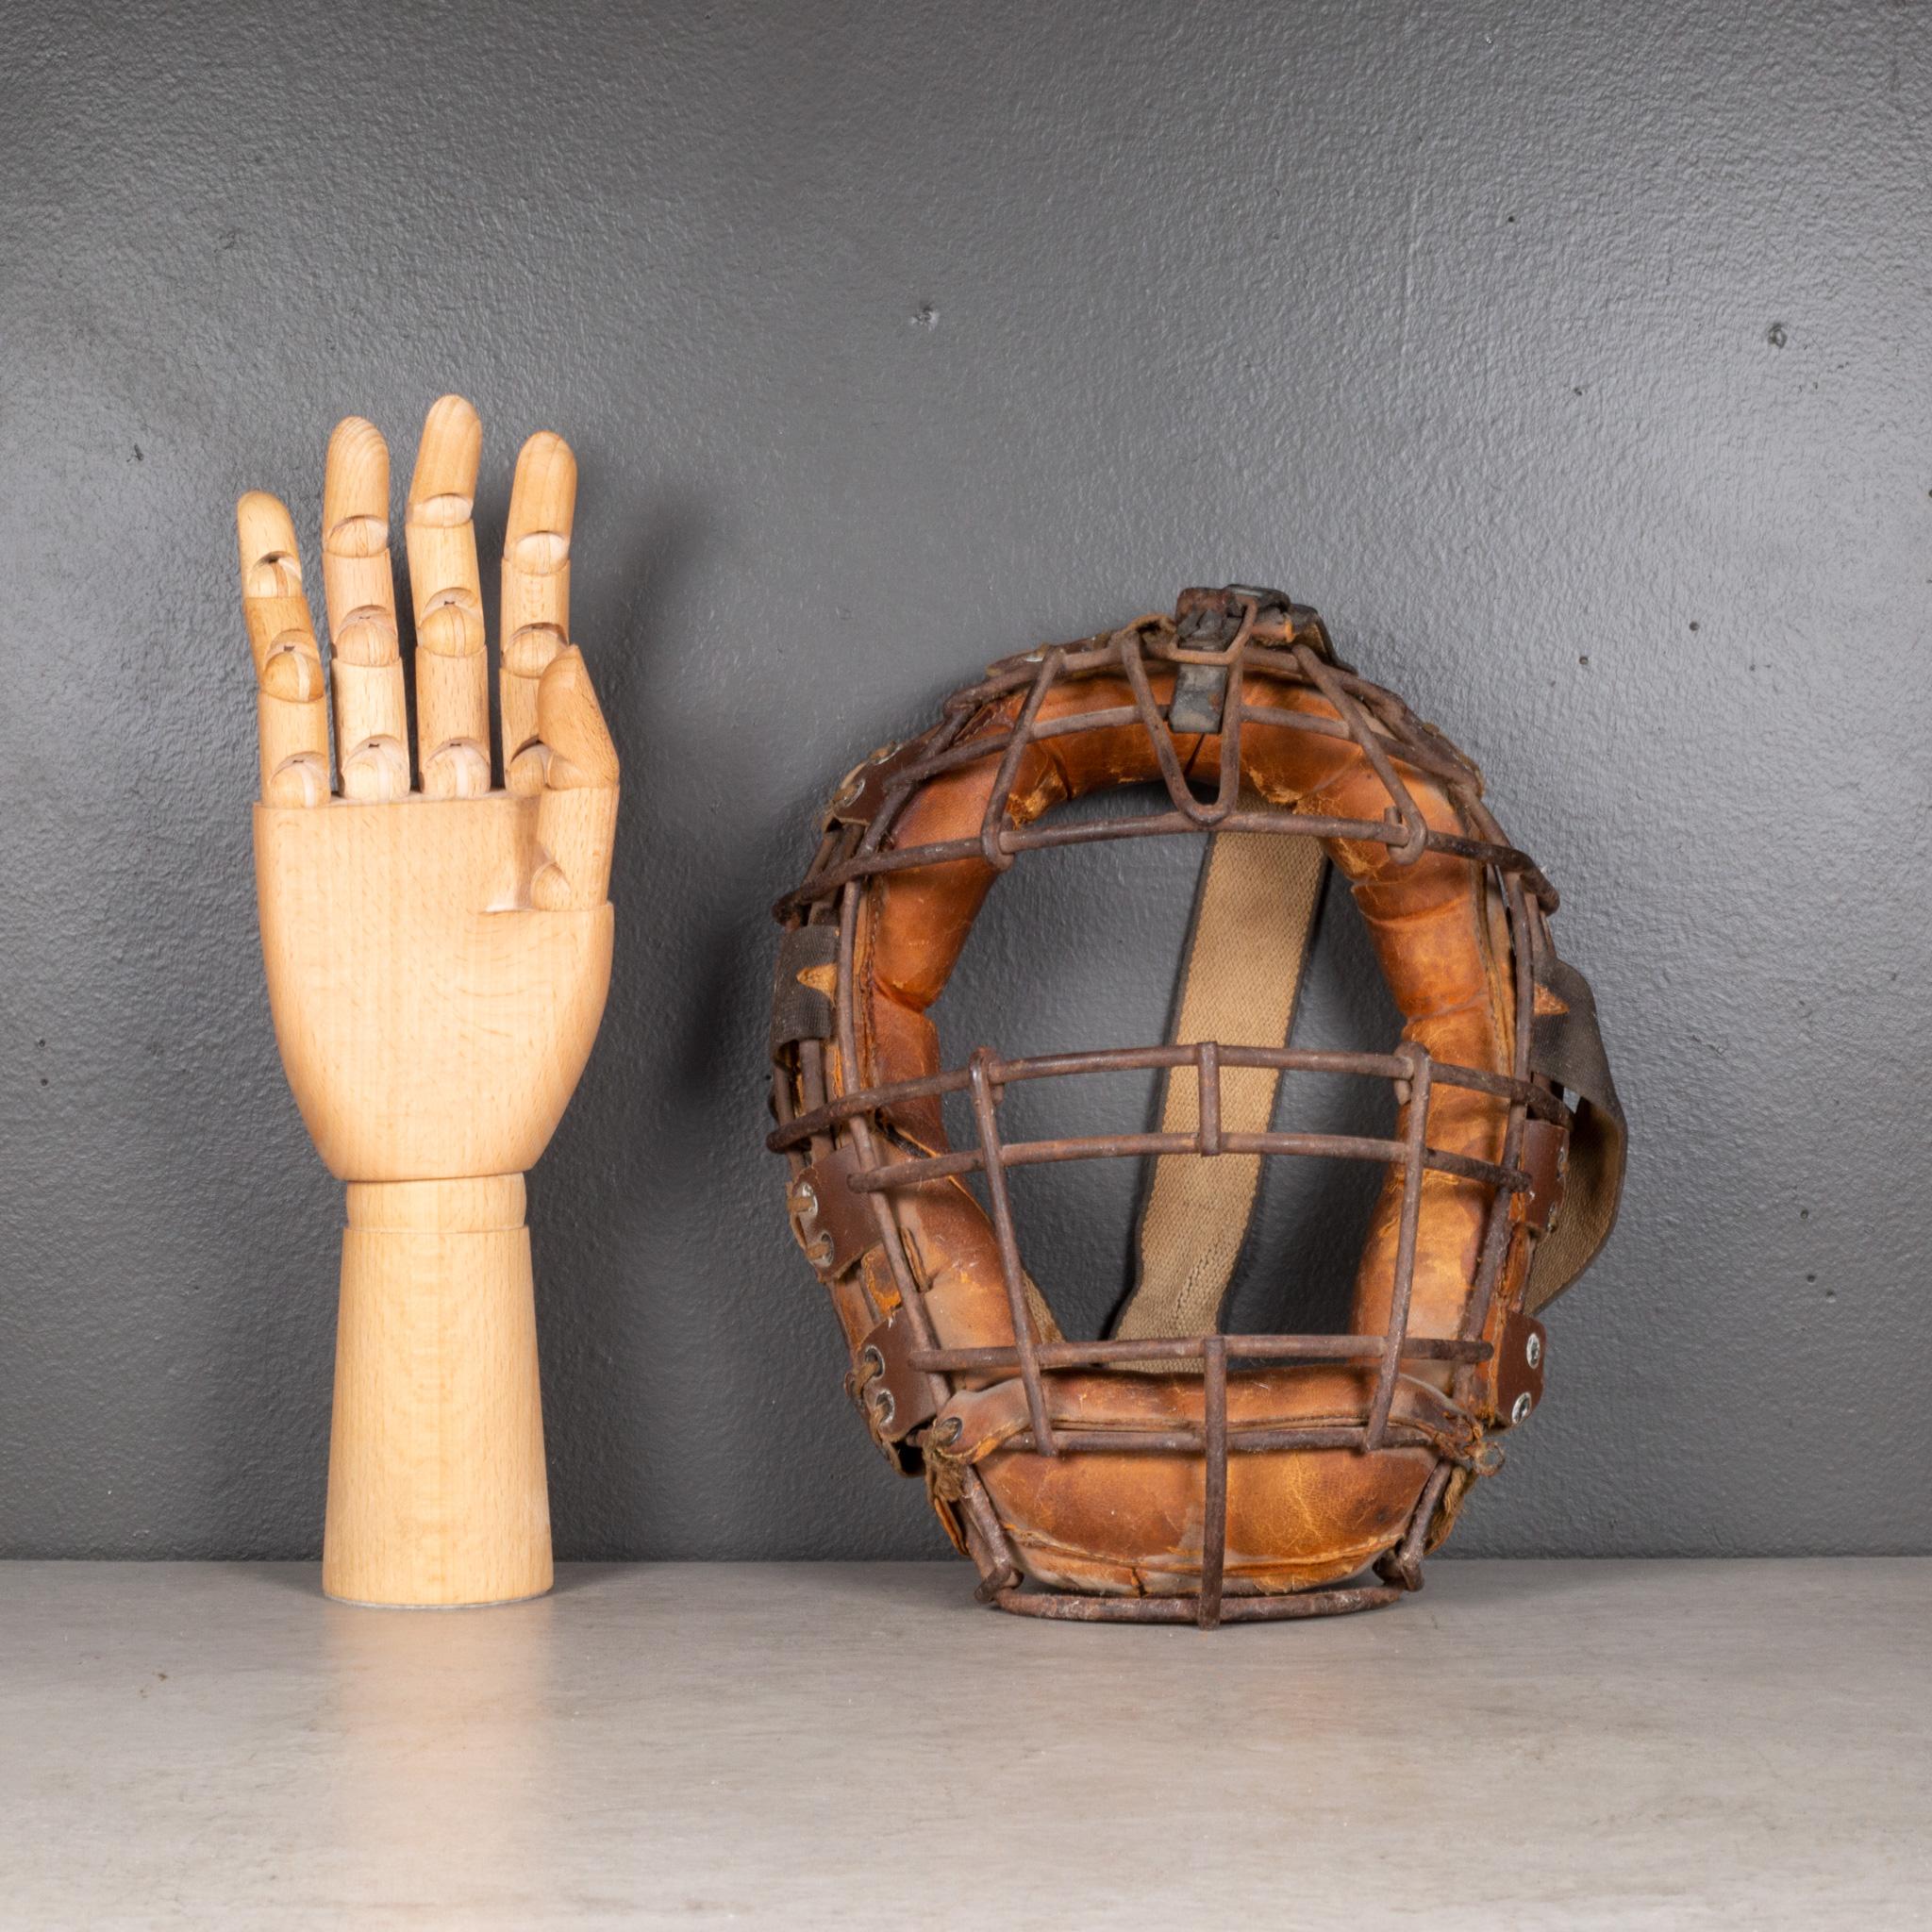 ABOUT

An original vintage catcher's mask by Wilson. The main body is carbon steel with thick, tan leather padding. The padding is held onto the body of the mask by brown leather straps and rawhide laced through grommets. The Wilson label is affixed